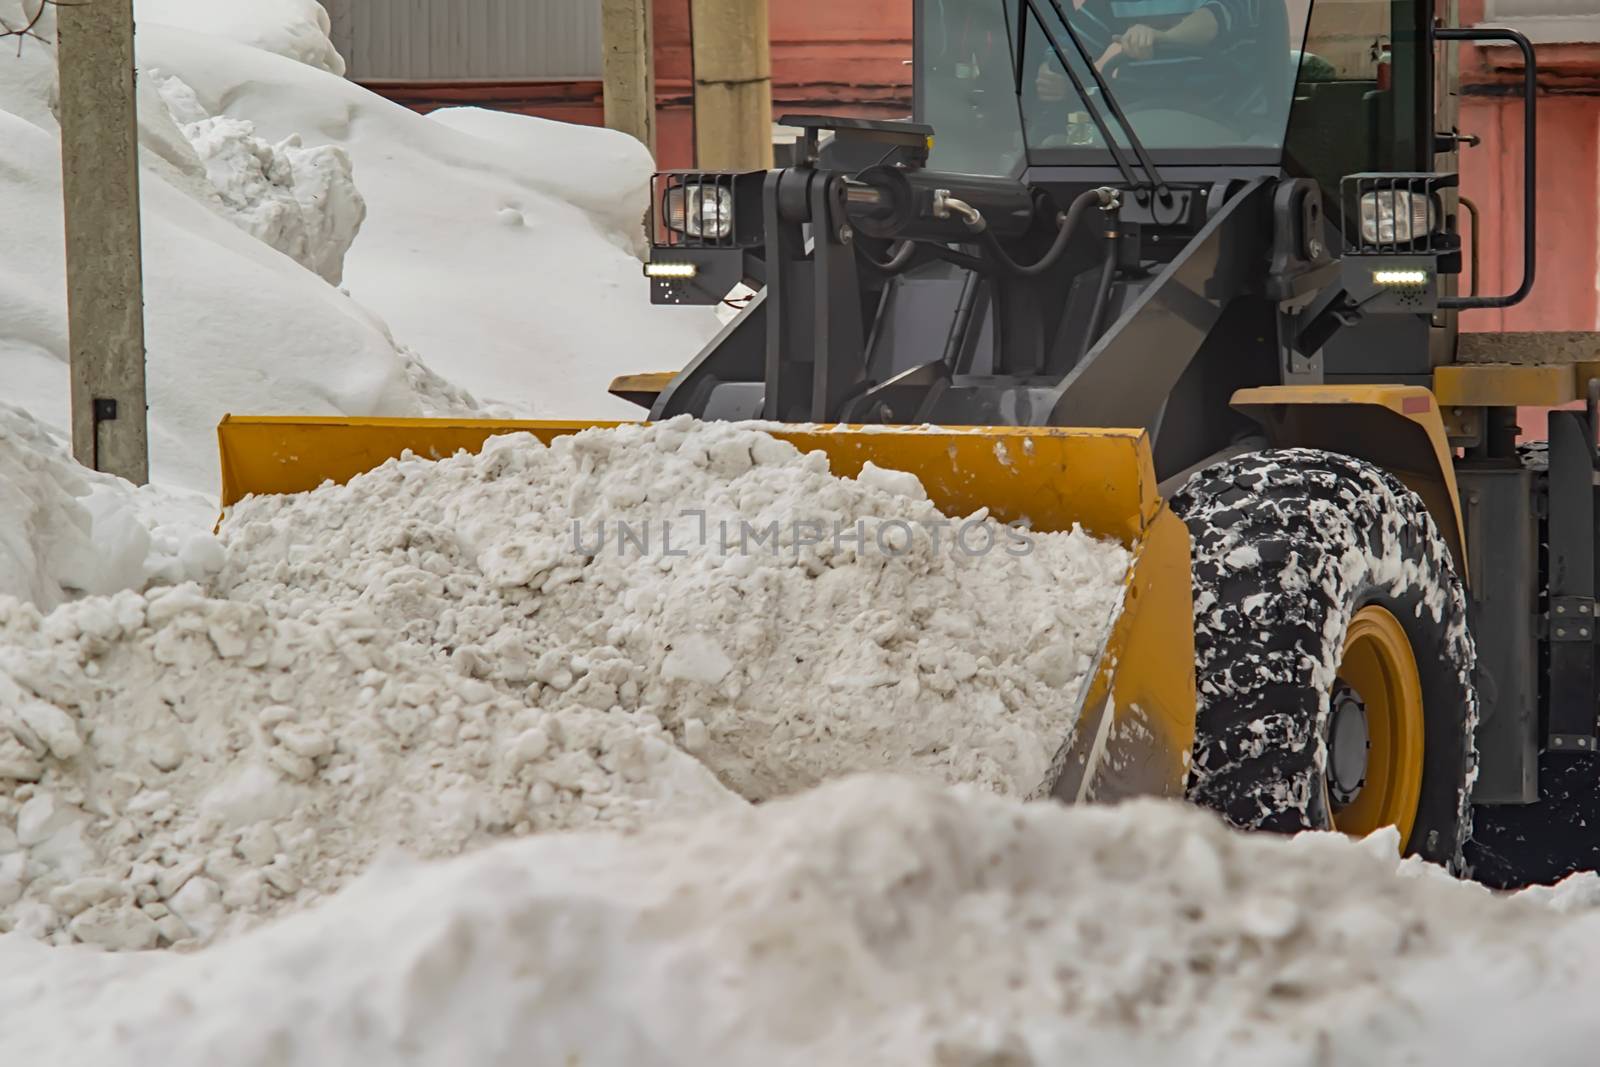 tractor, grader removes a pile of snow in the yard of a residential building by jk3030